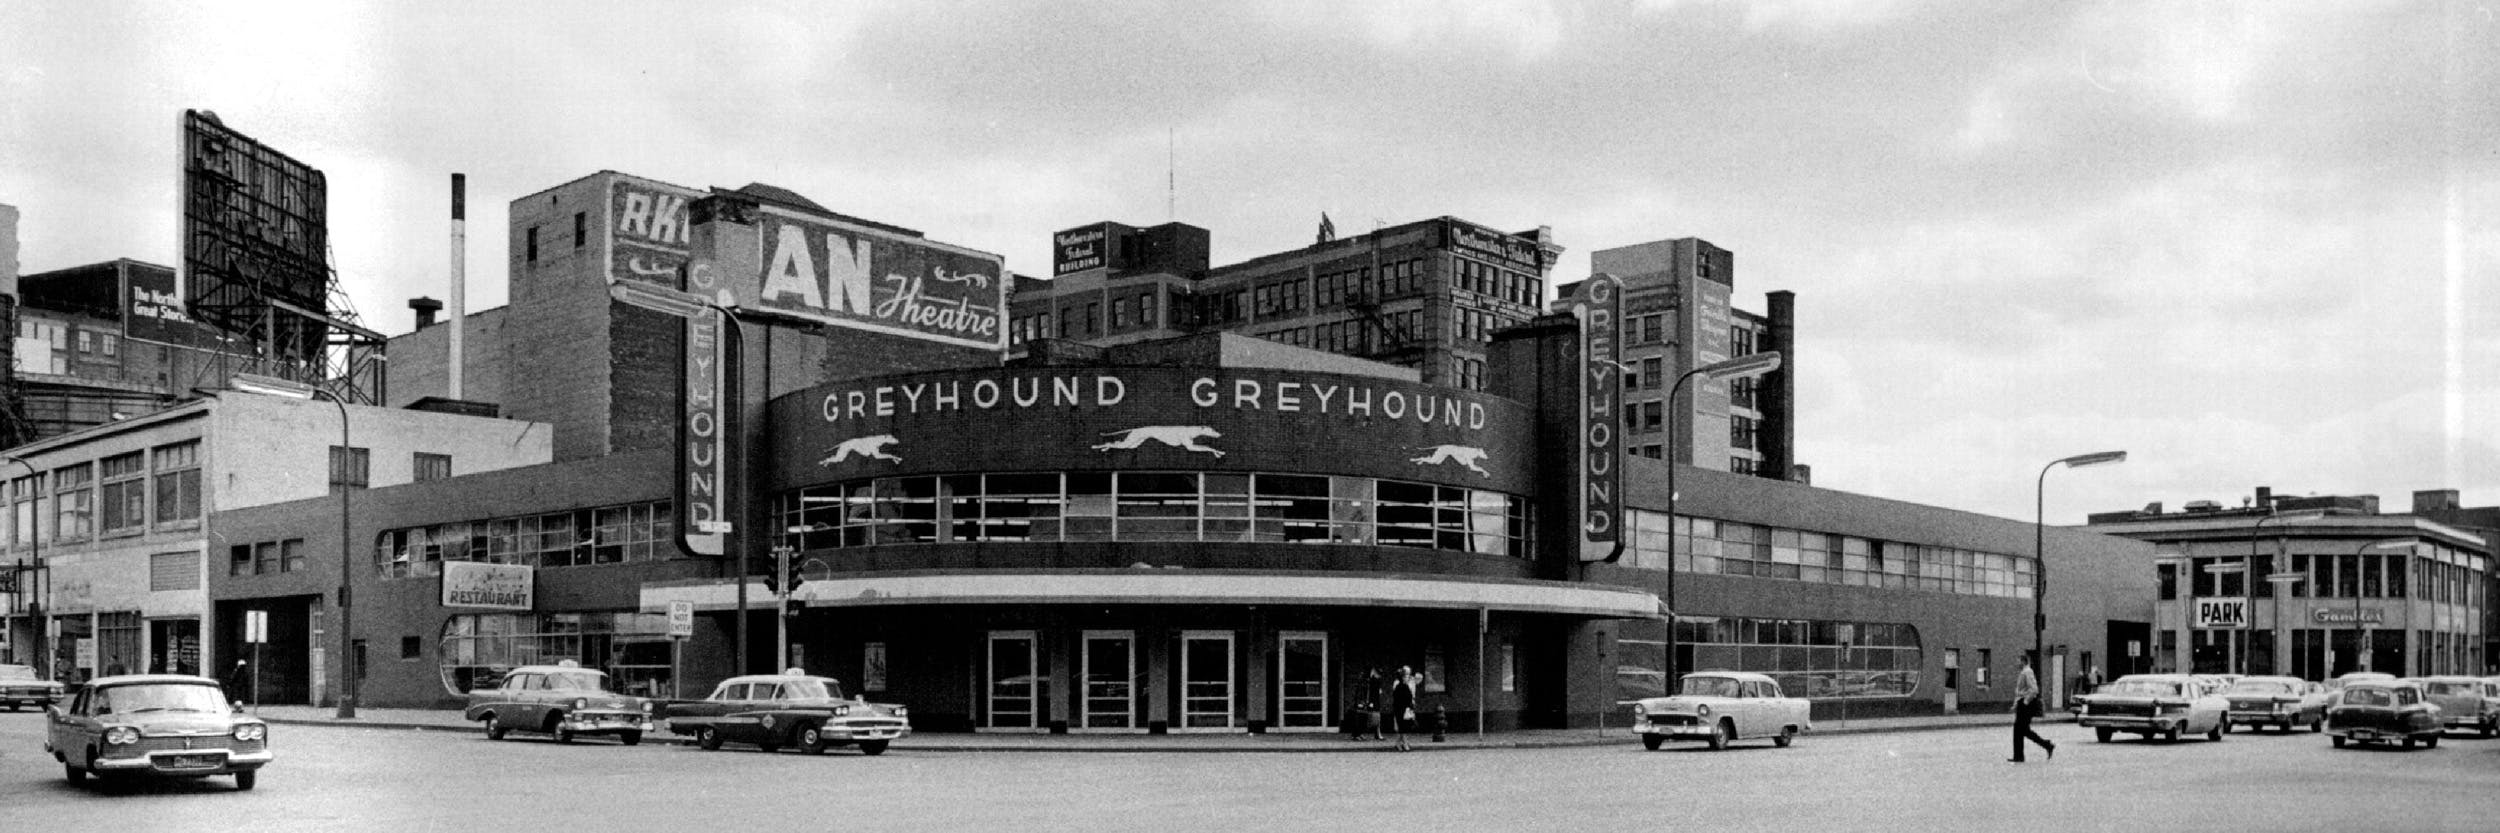 April 1960 Greyhound Bus Depot Bk. between 7th St. and 8th St. on 1st Av. No.